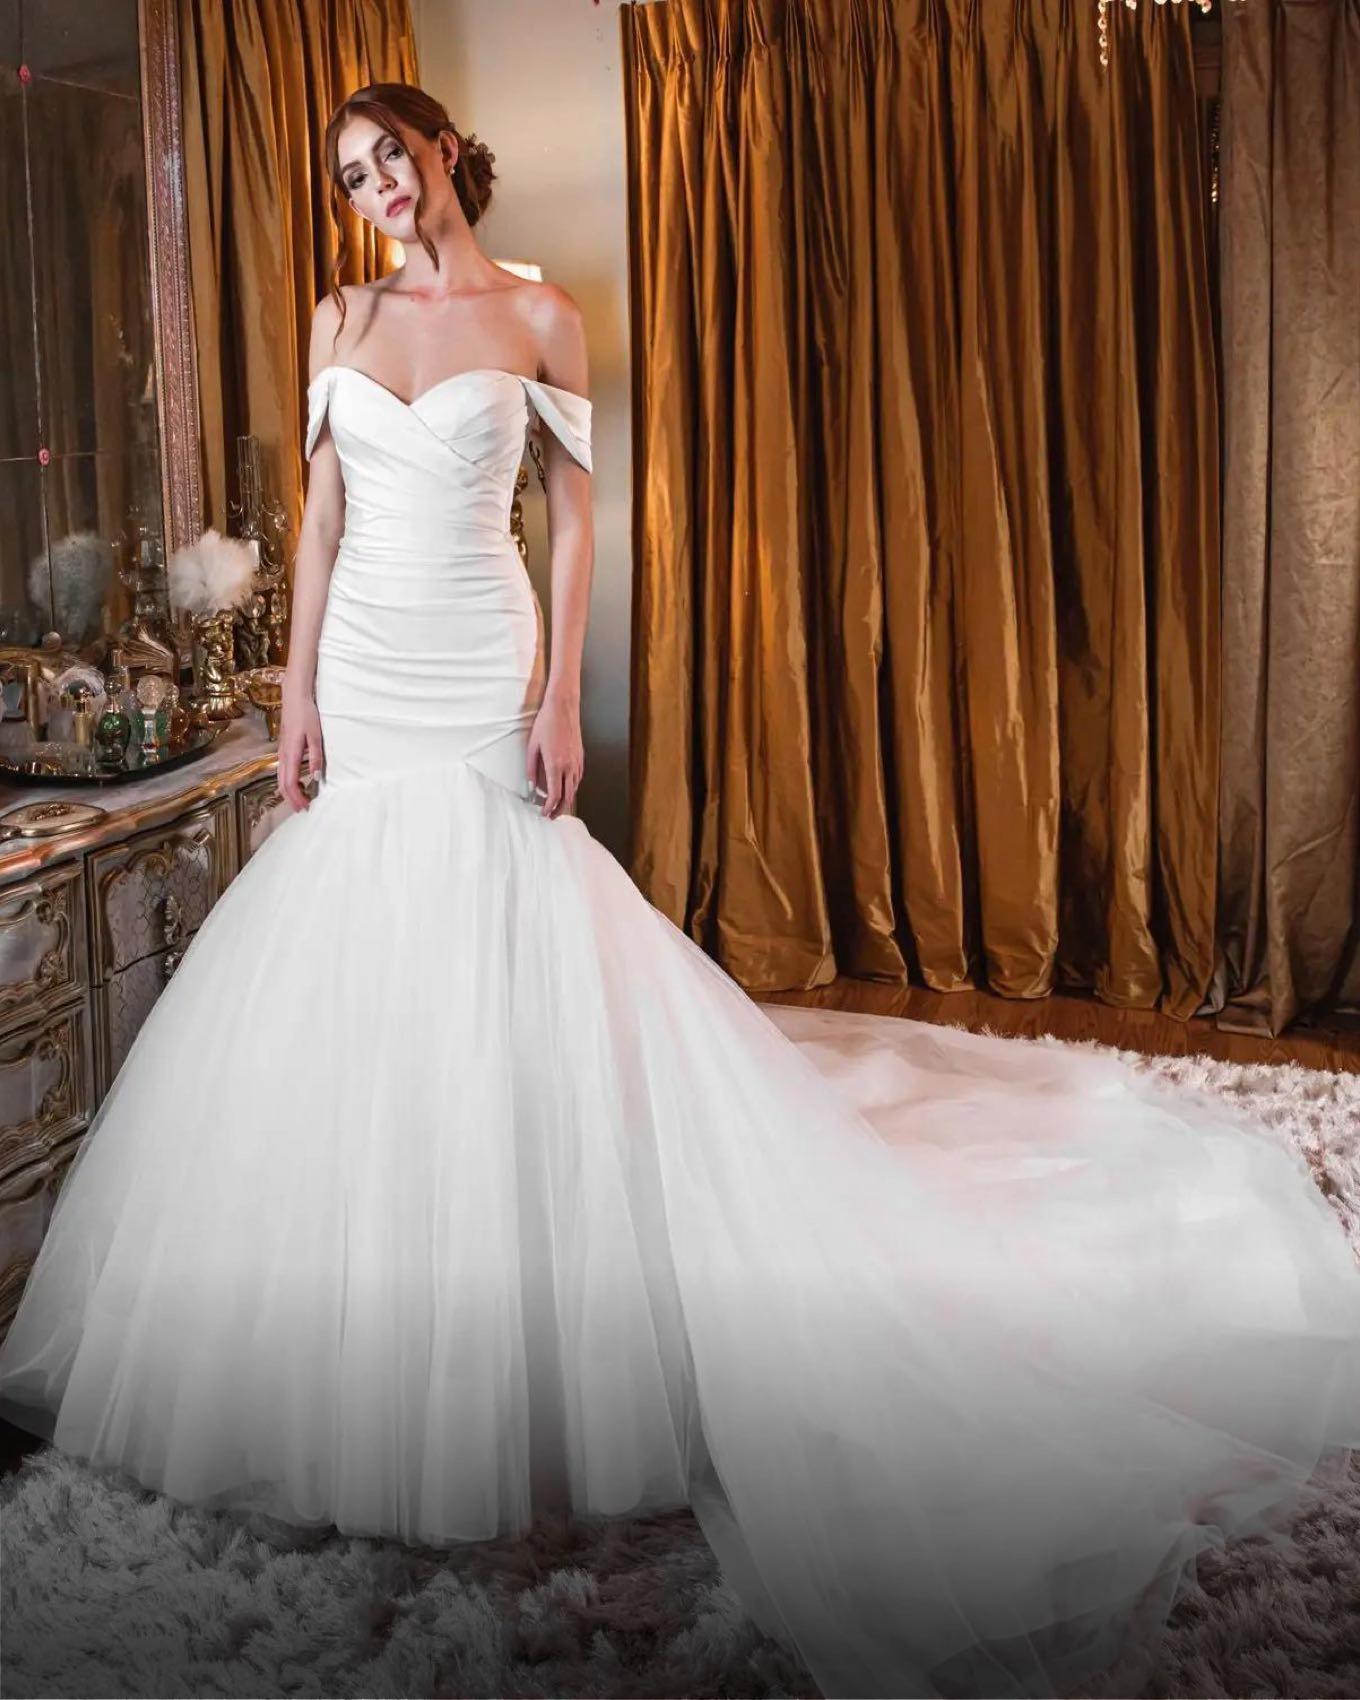 Model wearing a white gown by Mermaid, Orlando bridal shop